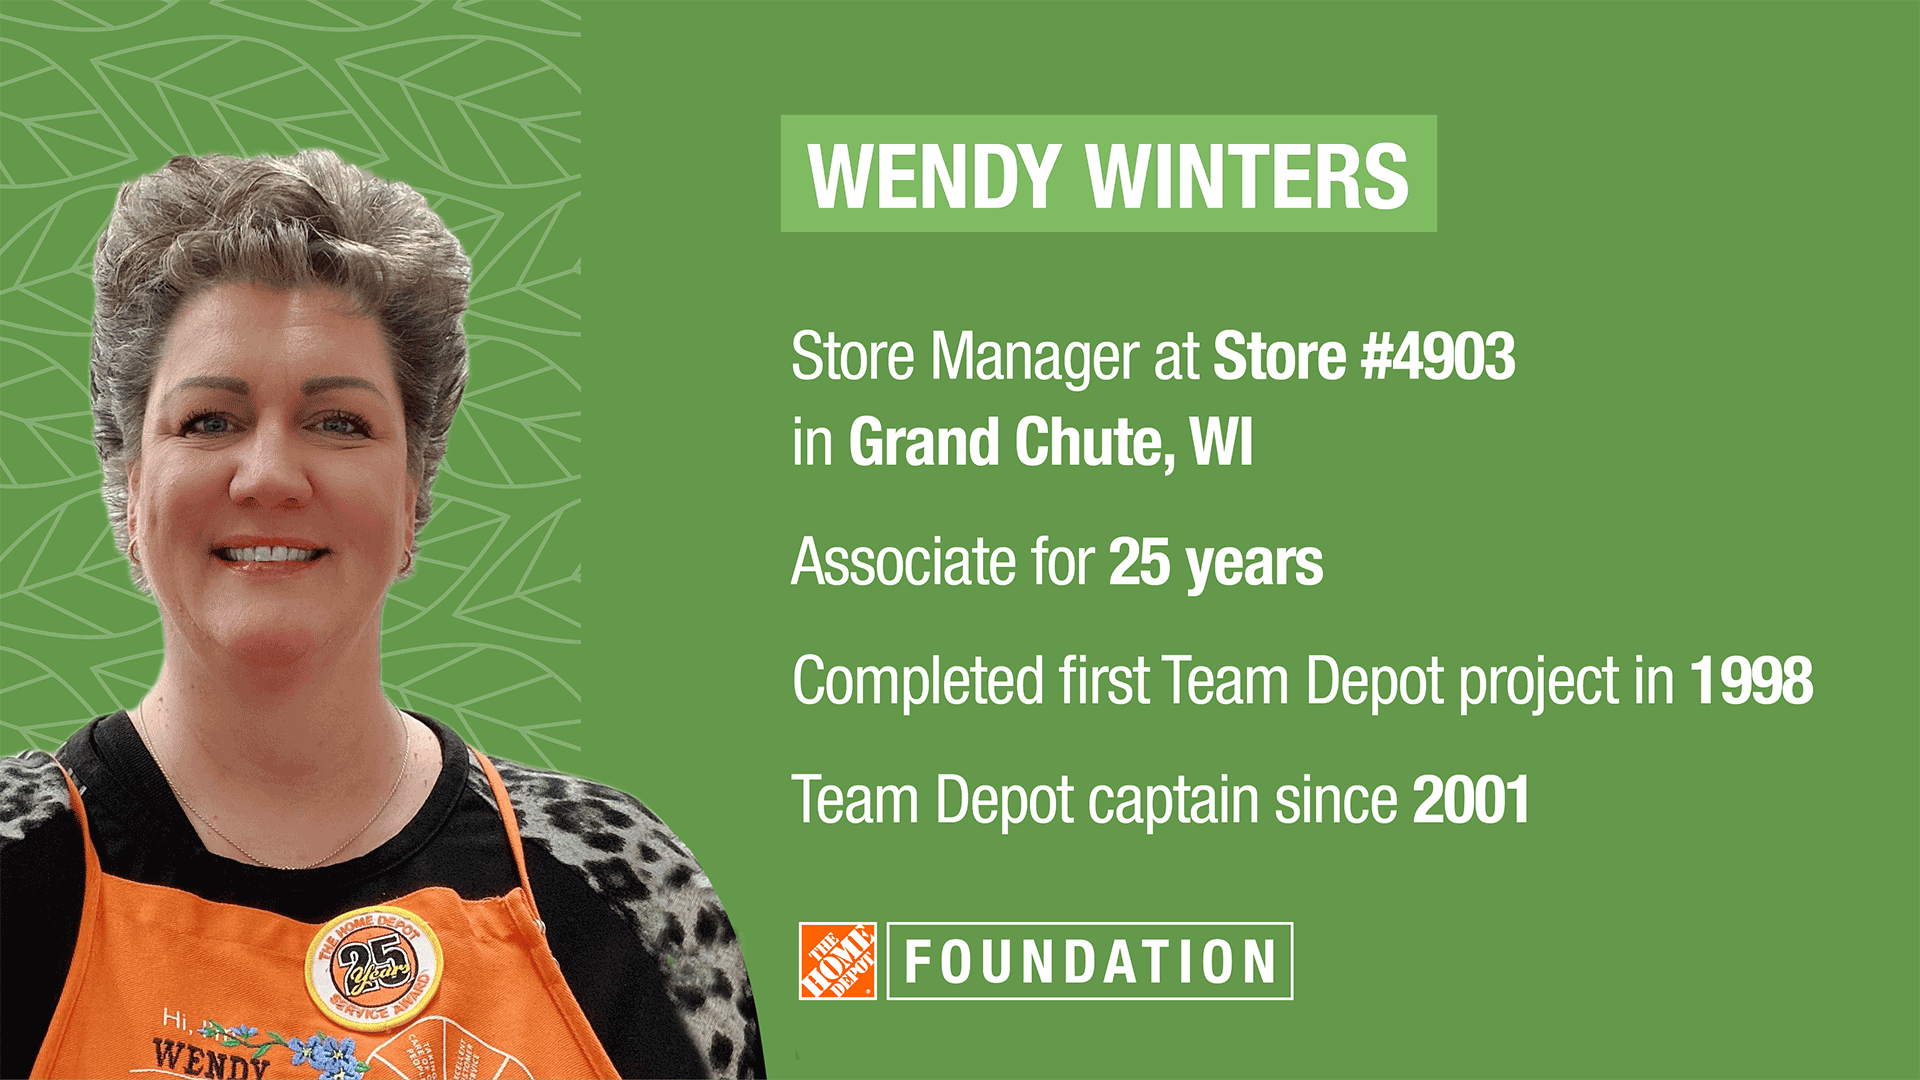 Information about Wendy Winters